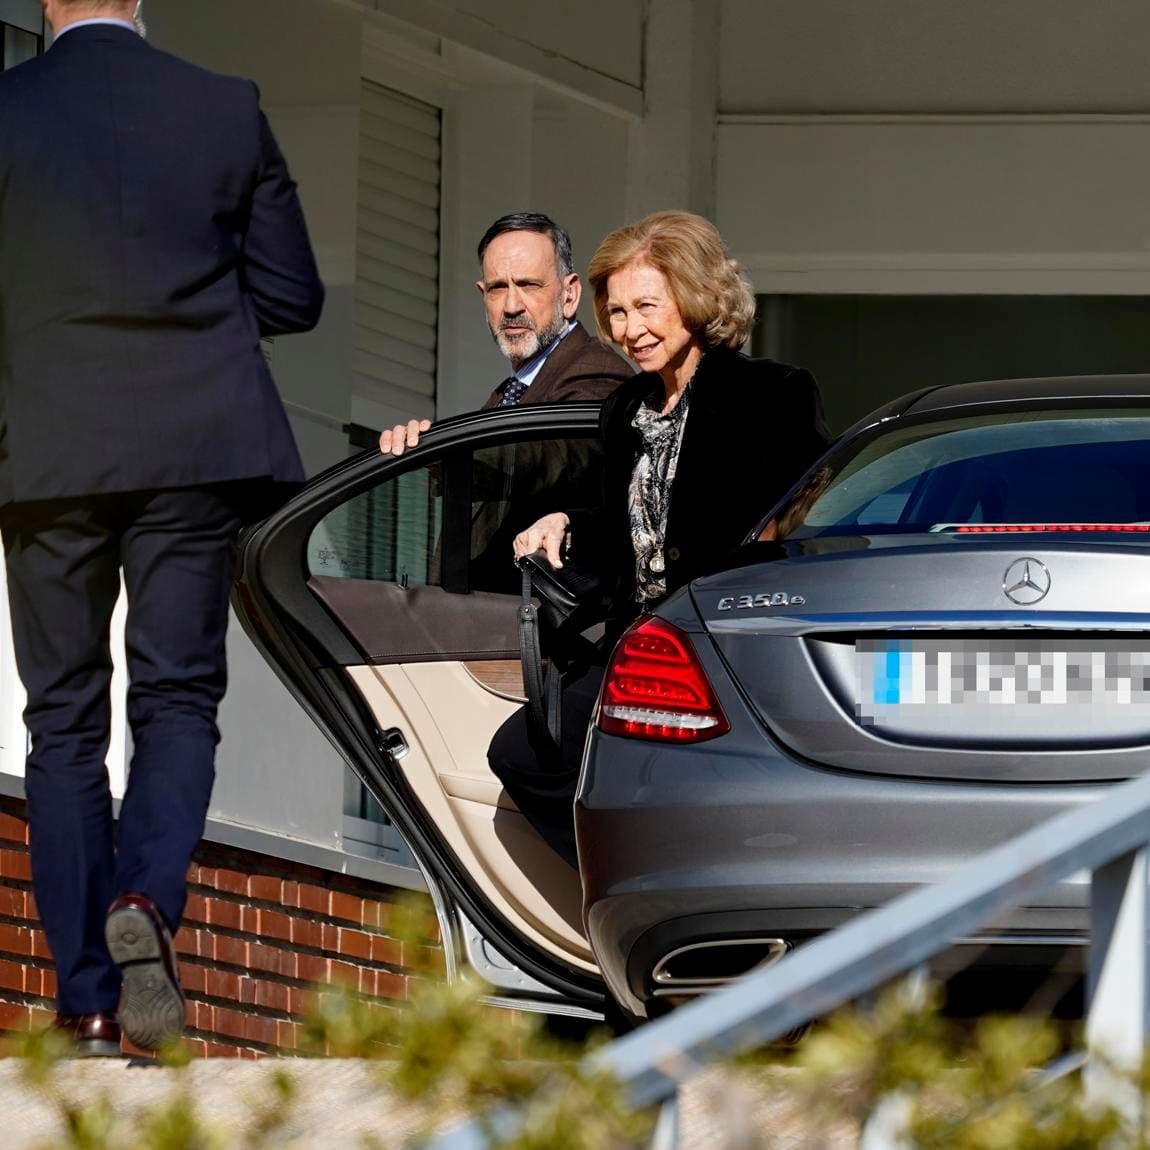 Queen Sofia was pictured arriving to the hospital to say goodbye to her sister in law